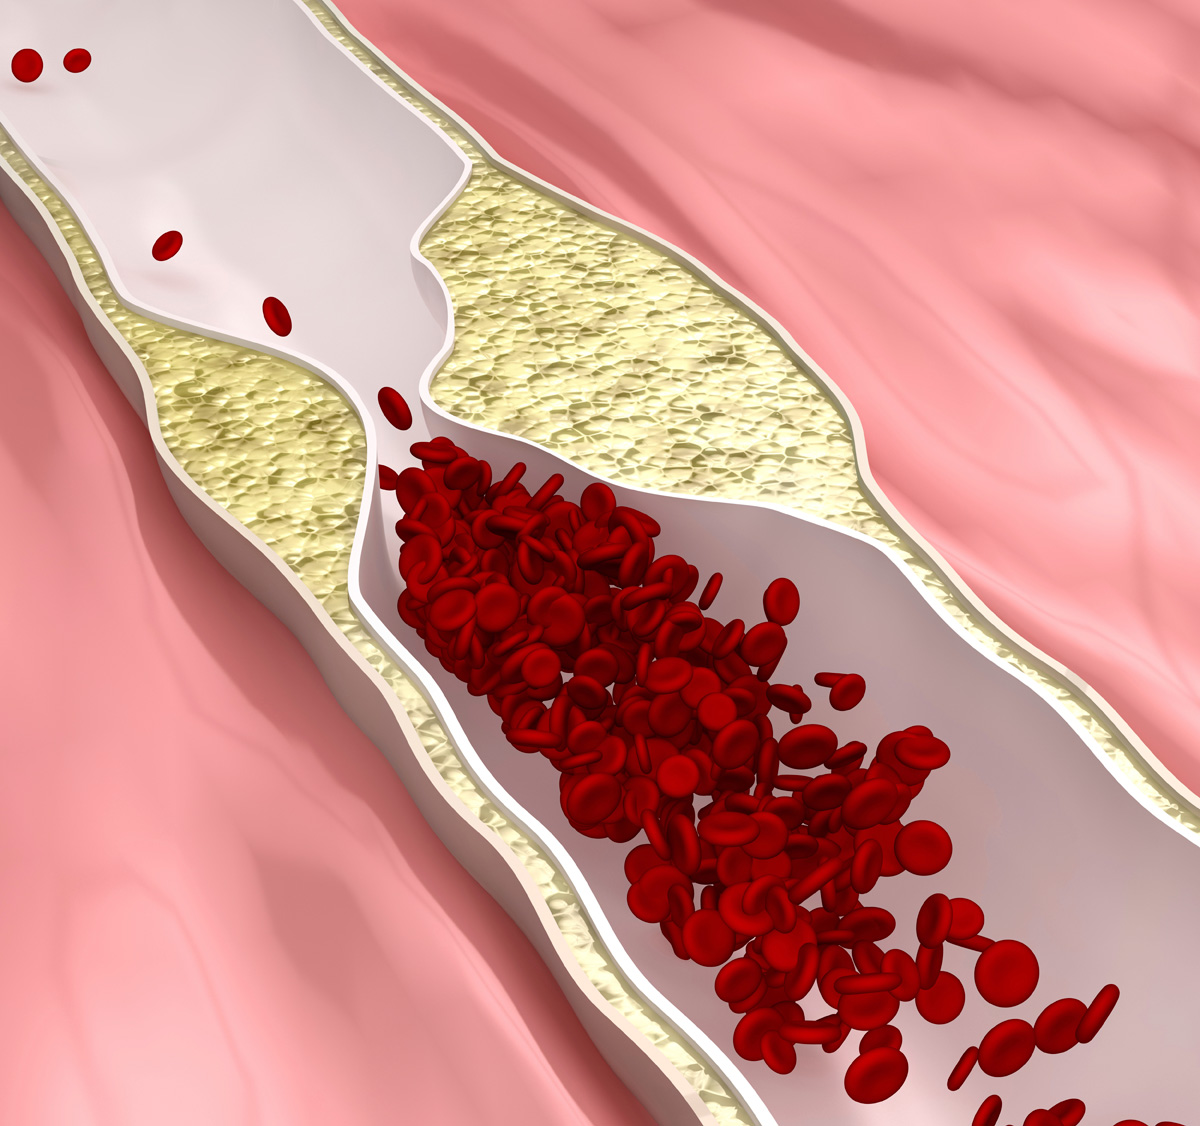 Q&A: How Does Coronary Artery Disease Develop?